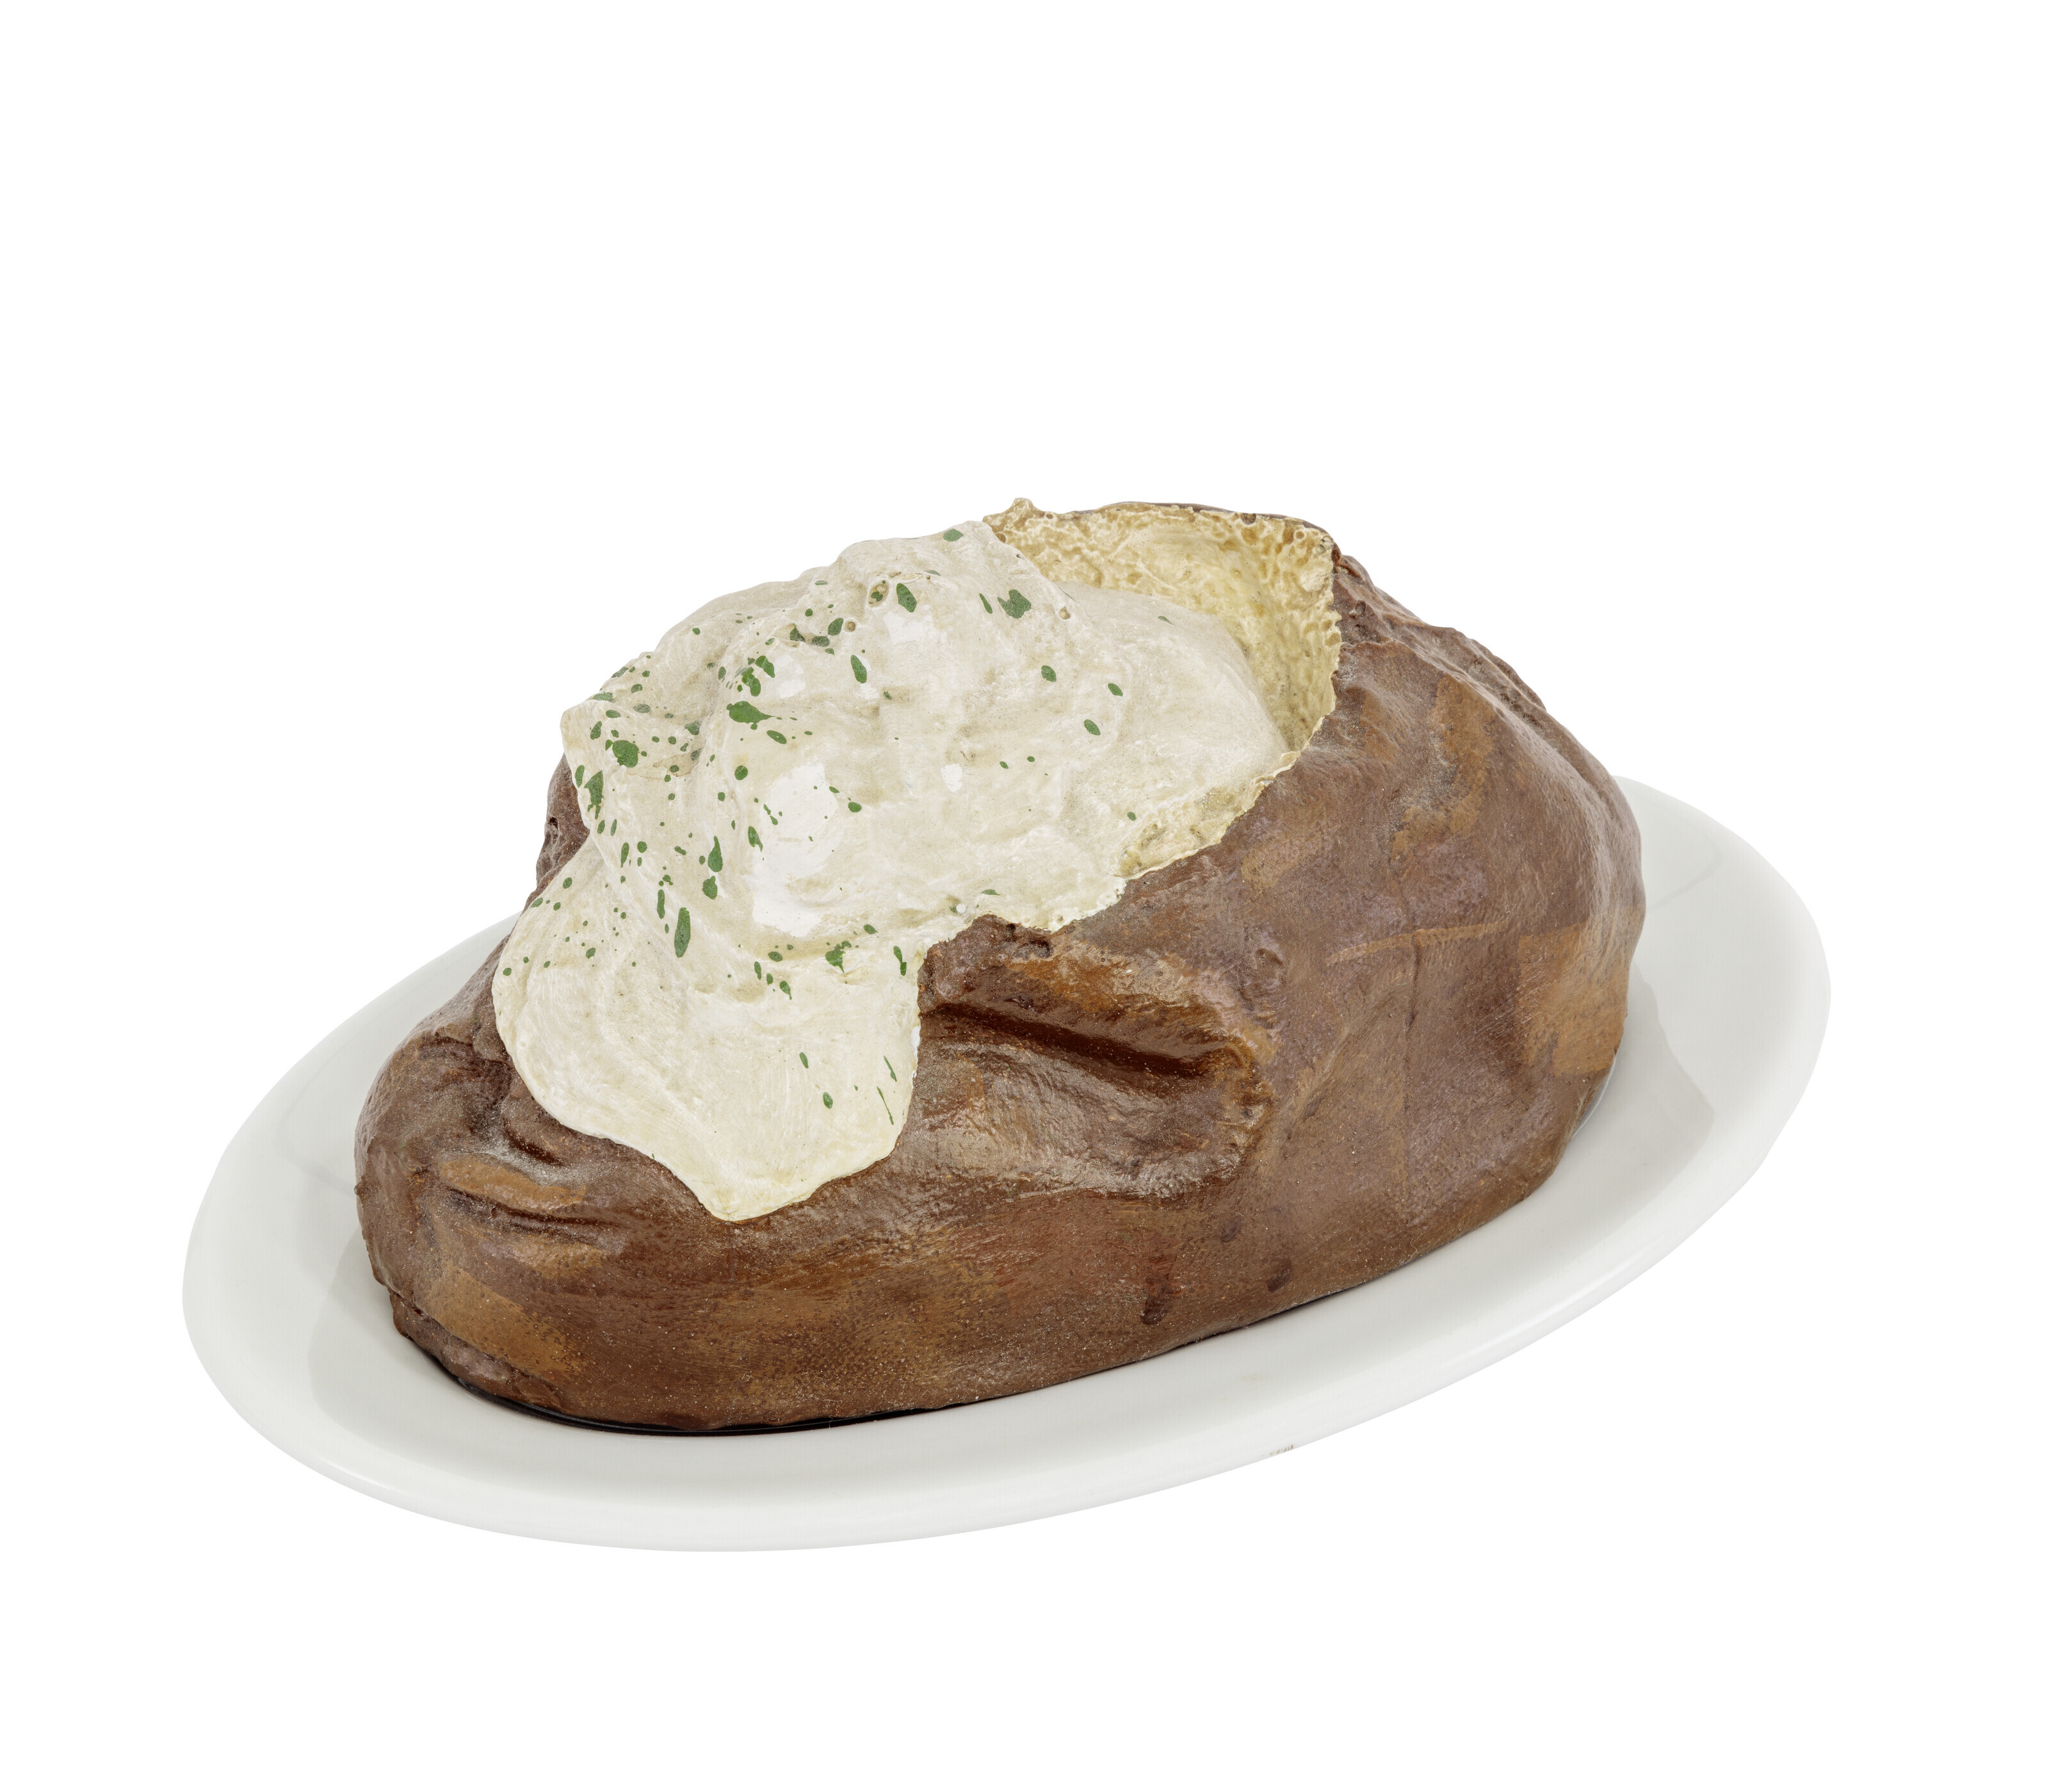 Baked Potato, from 7 Objects in a Box (Multiples in Retrospect 3)